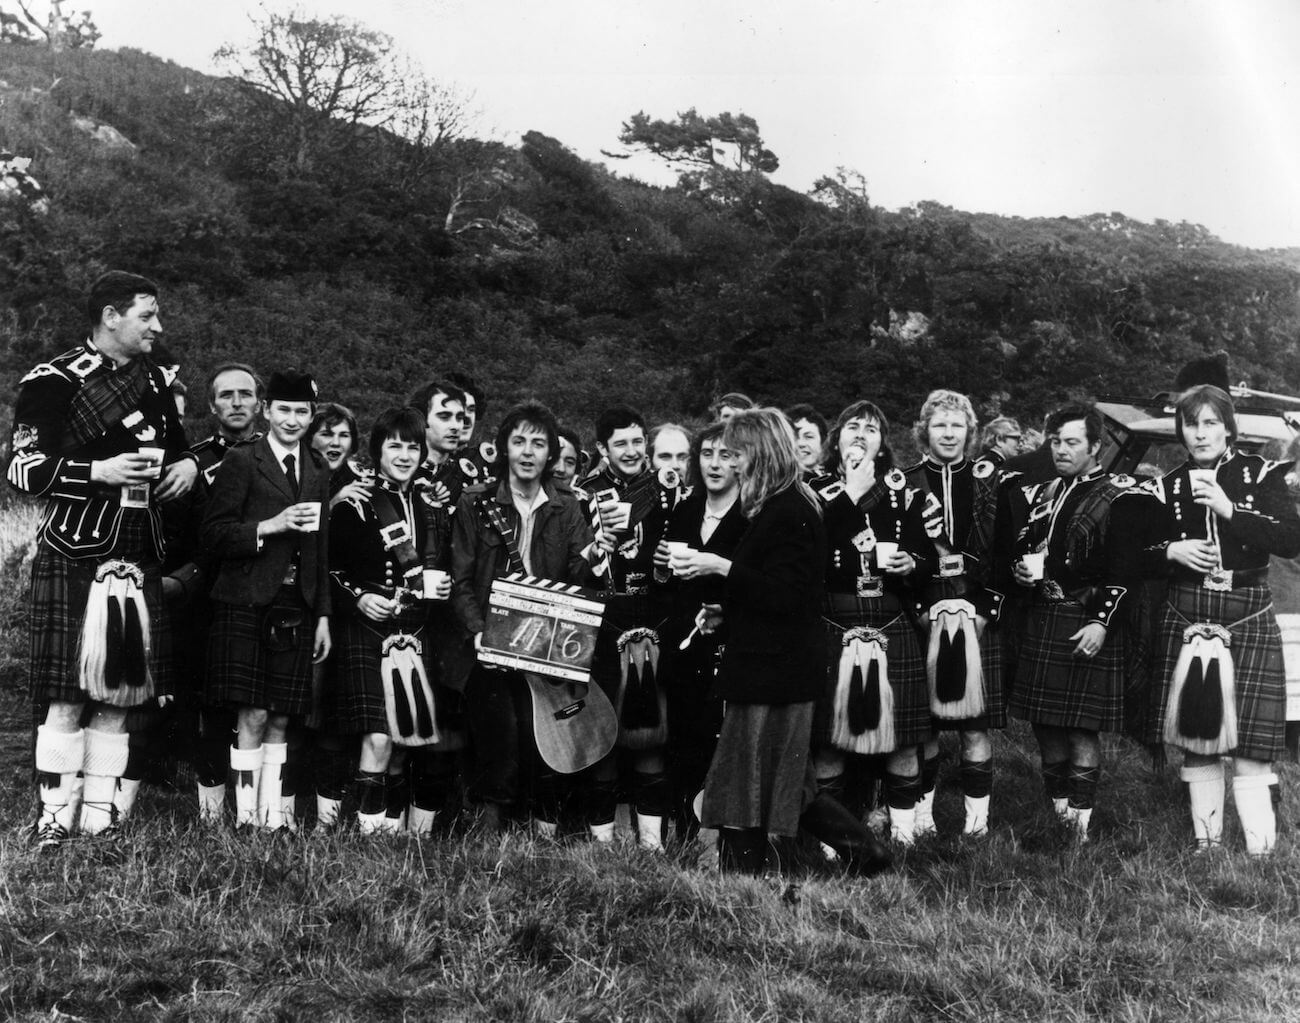 Paul McCartney with Wings and the pipe band from the music video for 'Mull of Kintyre' in 1977.